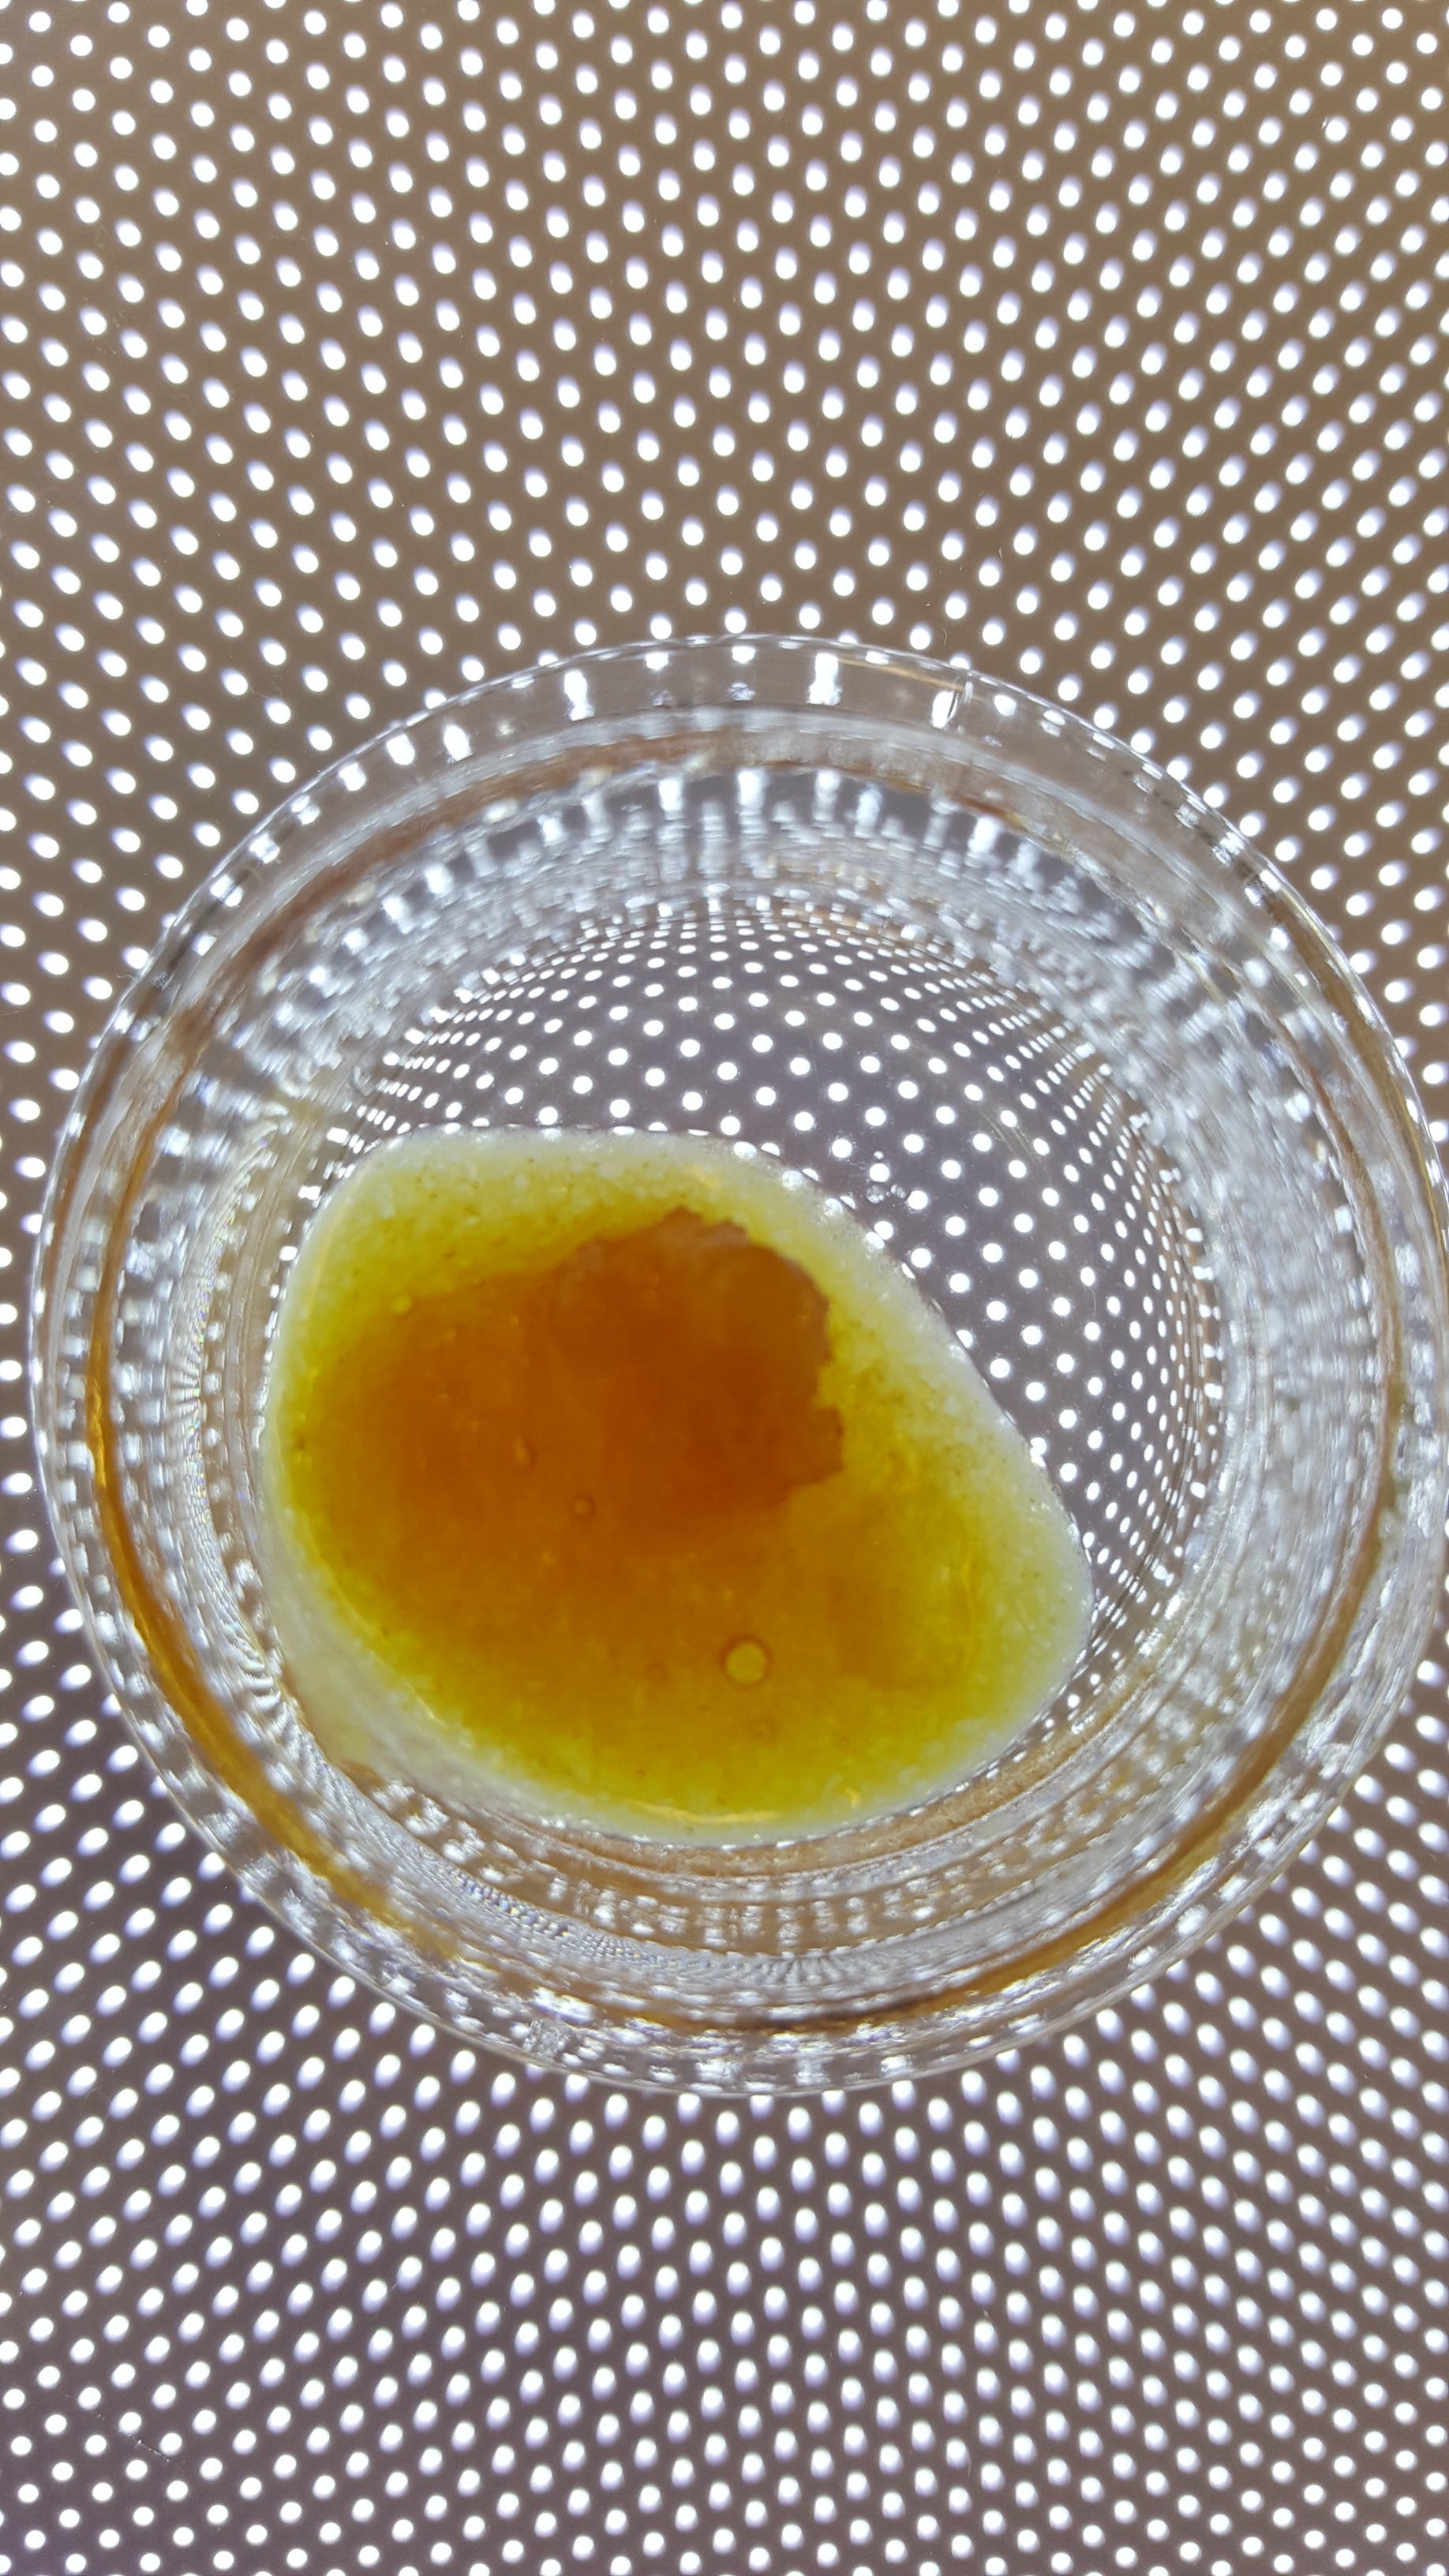 concentrate-master-kush-cocked-and-loaded-organics